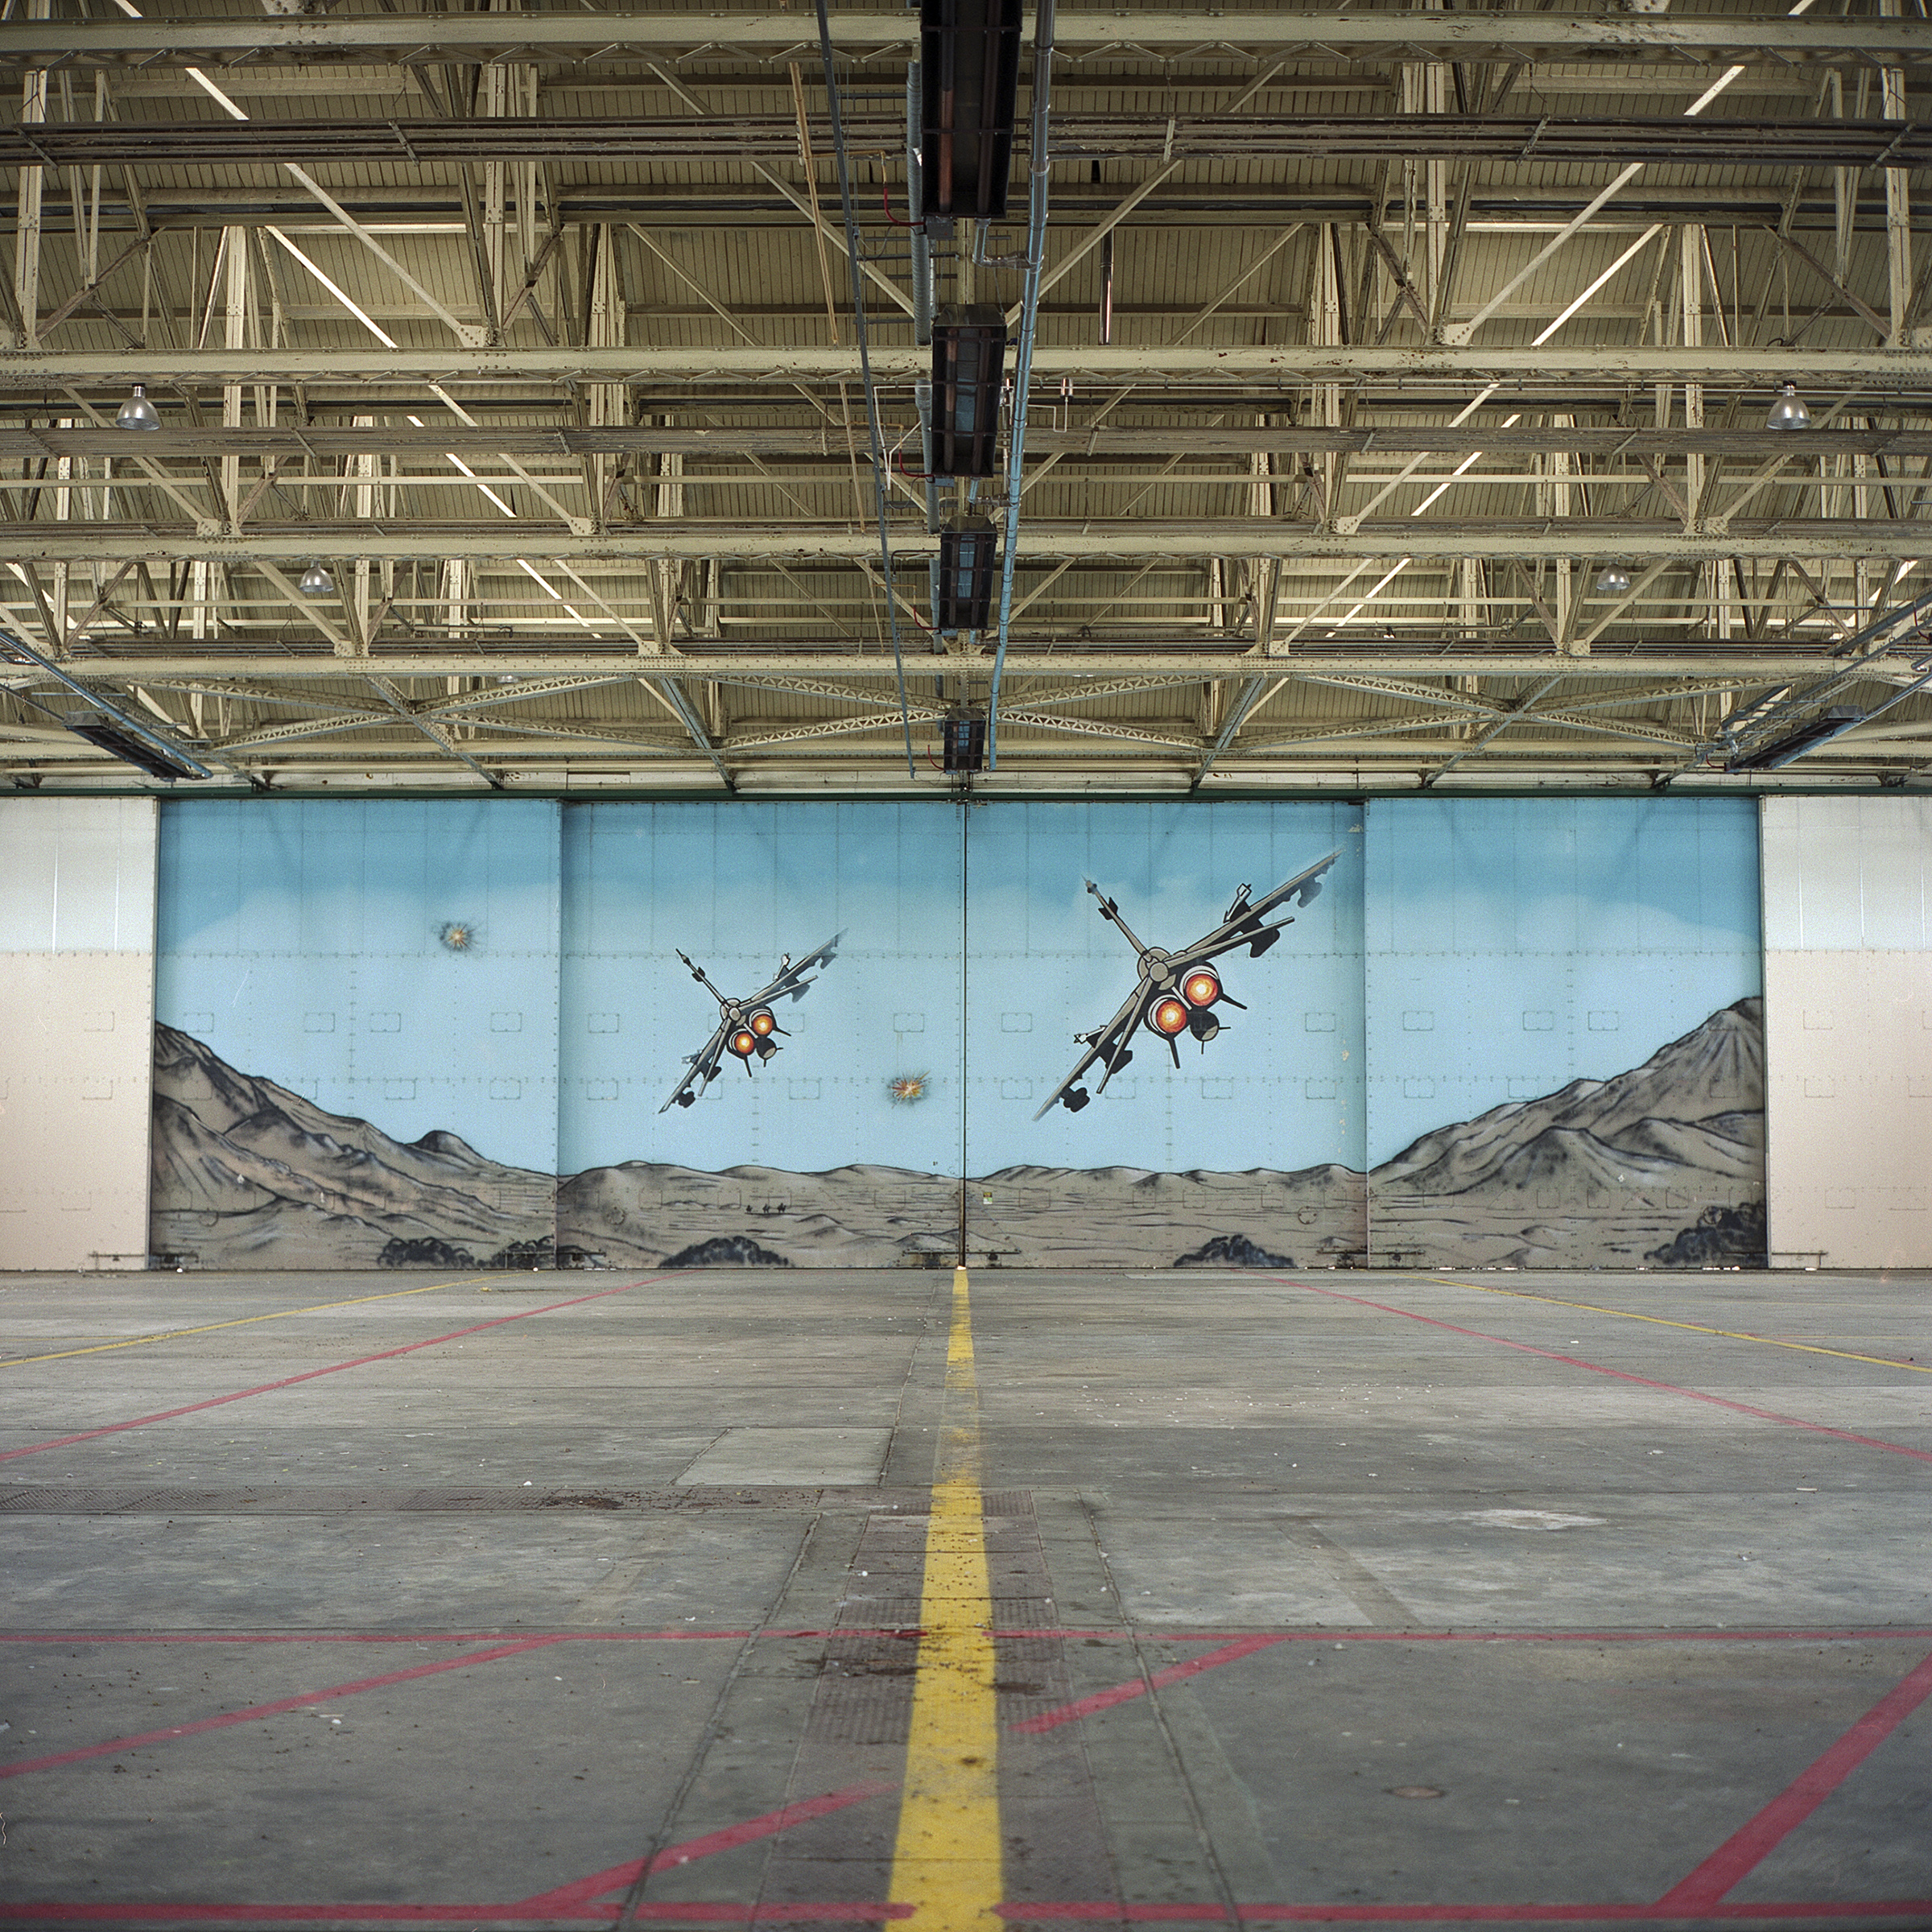 Yellow line (centered), with red lines that criss-cross, draws the eye to large hangar mural painted with two craft (in flight from behind) in a mountainous grey landscape